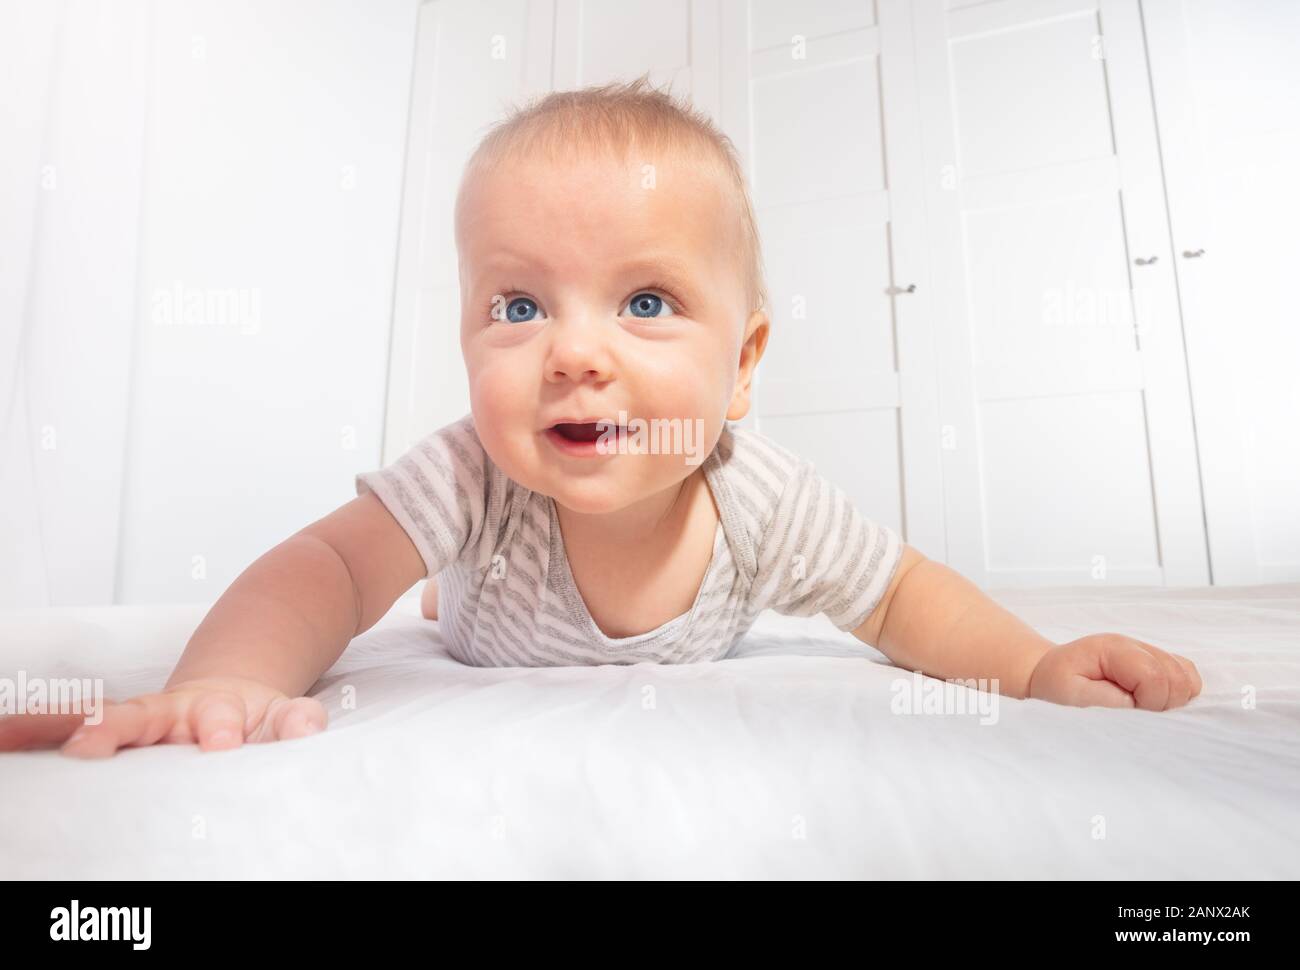 Cute little baby boy toddler learn to crawl view from low angle smiling to camera Stock Photo